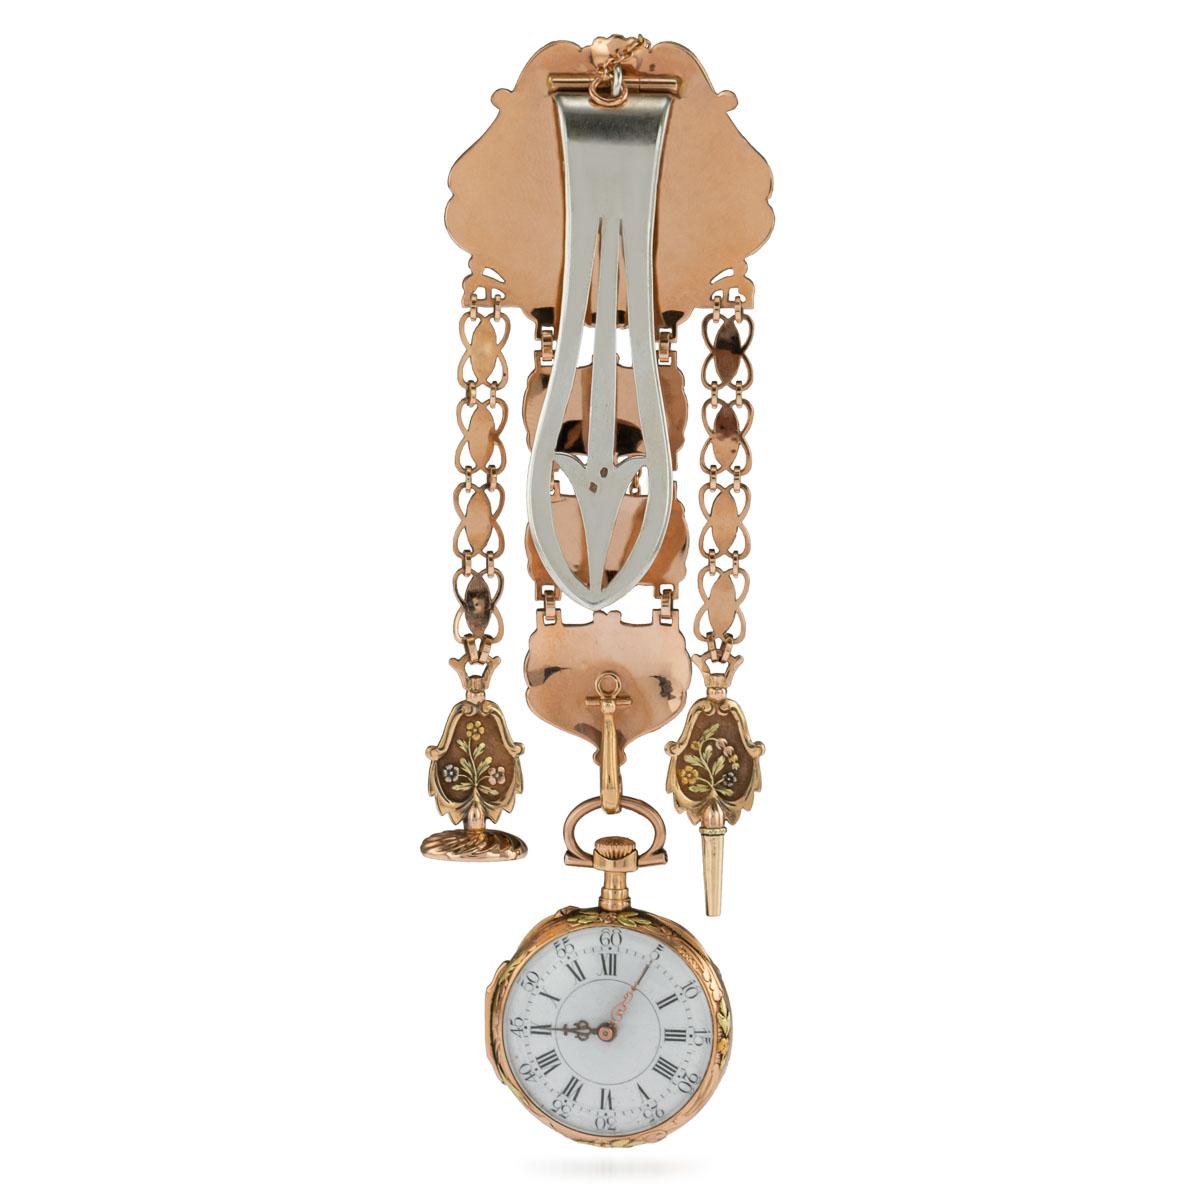 Antique late-18th Century Swiss four-colour gold open face watch with the original matching chatelaine, key and seal. Gilt-finished verge movement, finely pierced and engraved scroll decorated balance cock and foot, white enamel dial, Roman